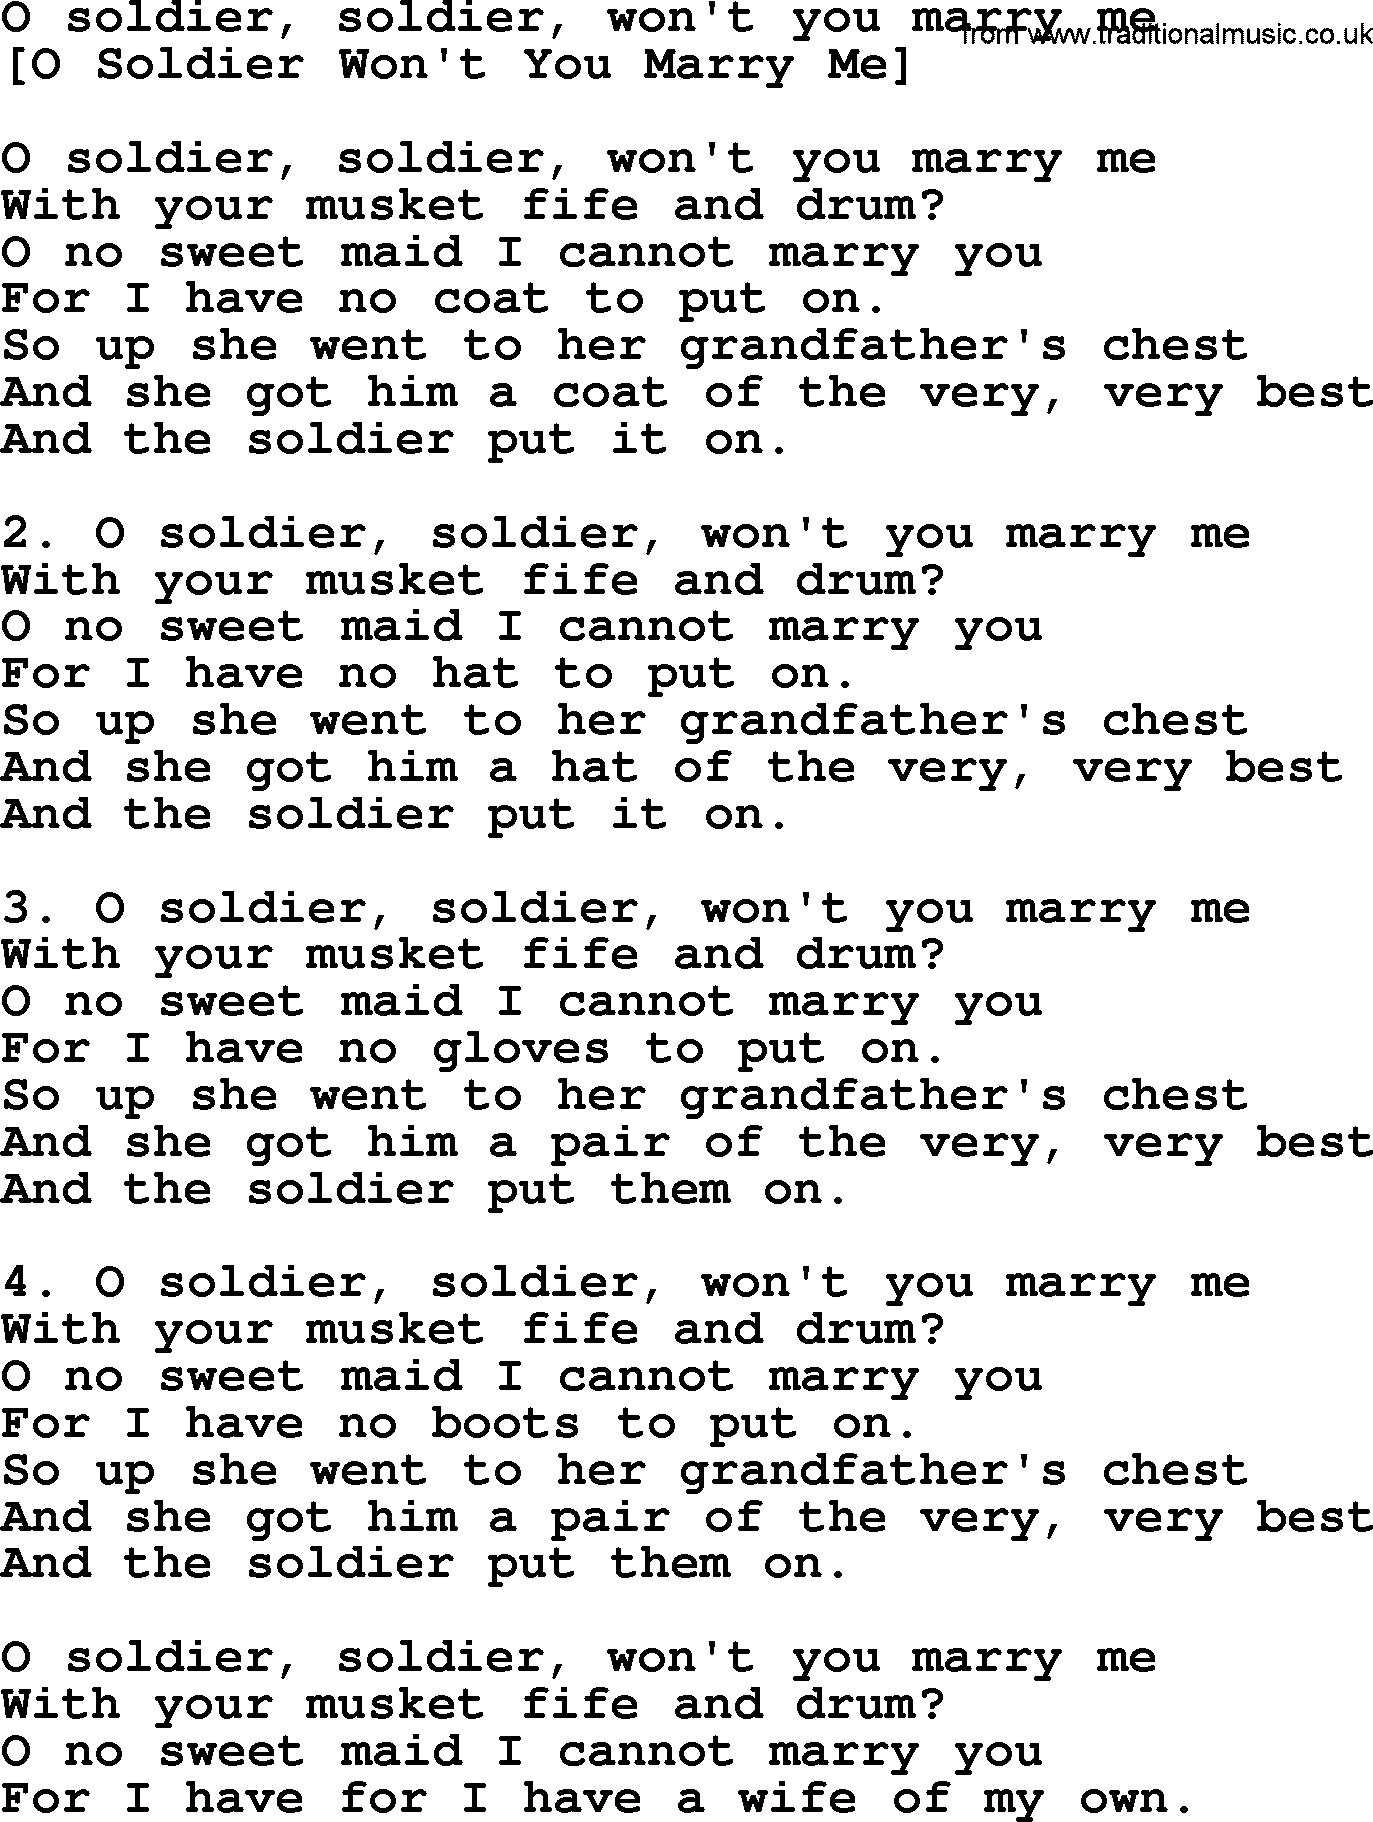 Old English Song: O Soldier, Soldier, Won't You Marry Me lyrics